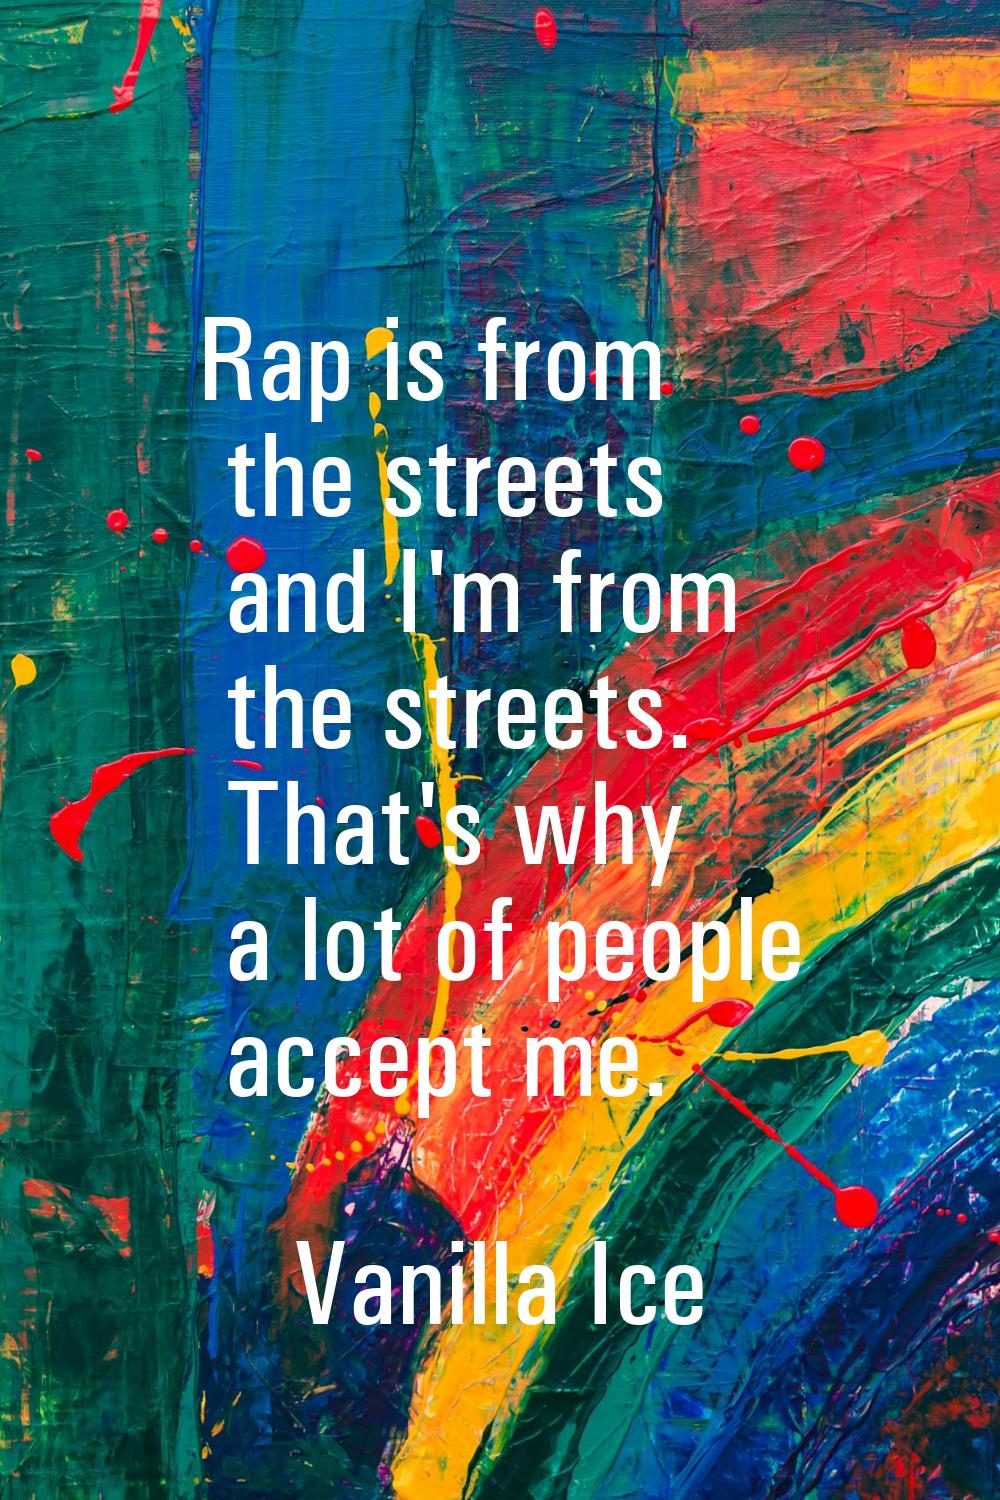 Rap is from the streets and I'm from the streets. That's why a lot of people accept me.